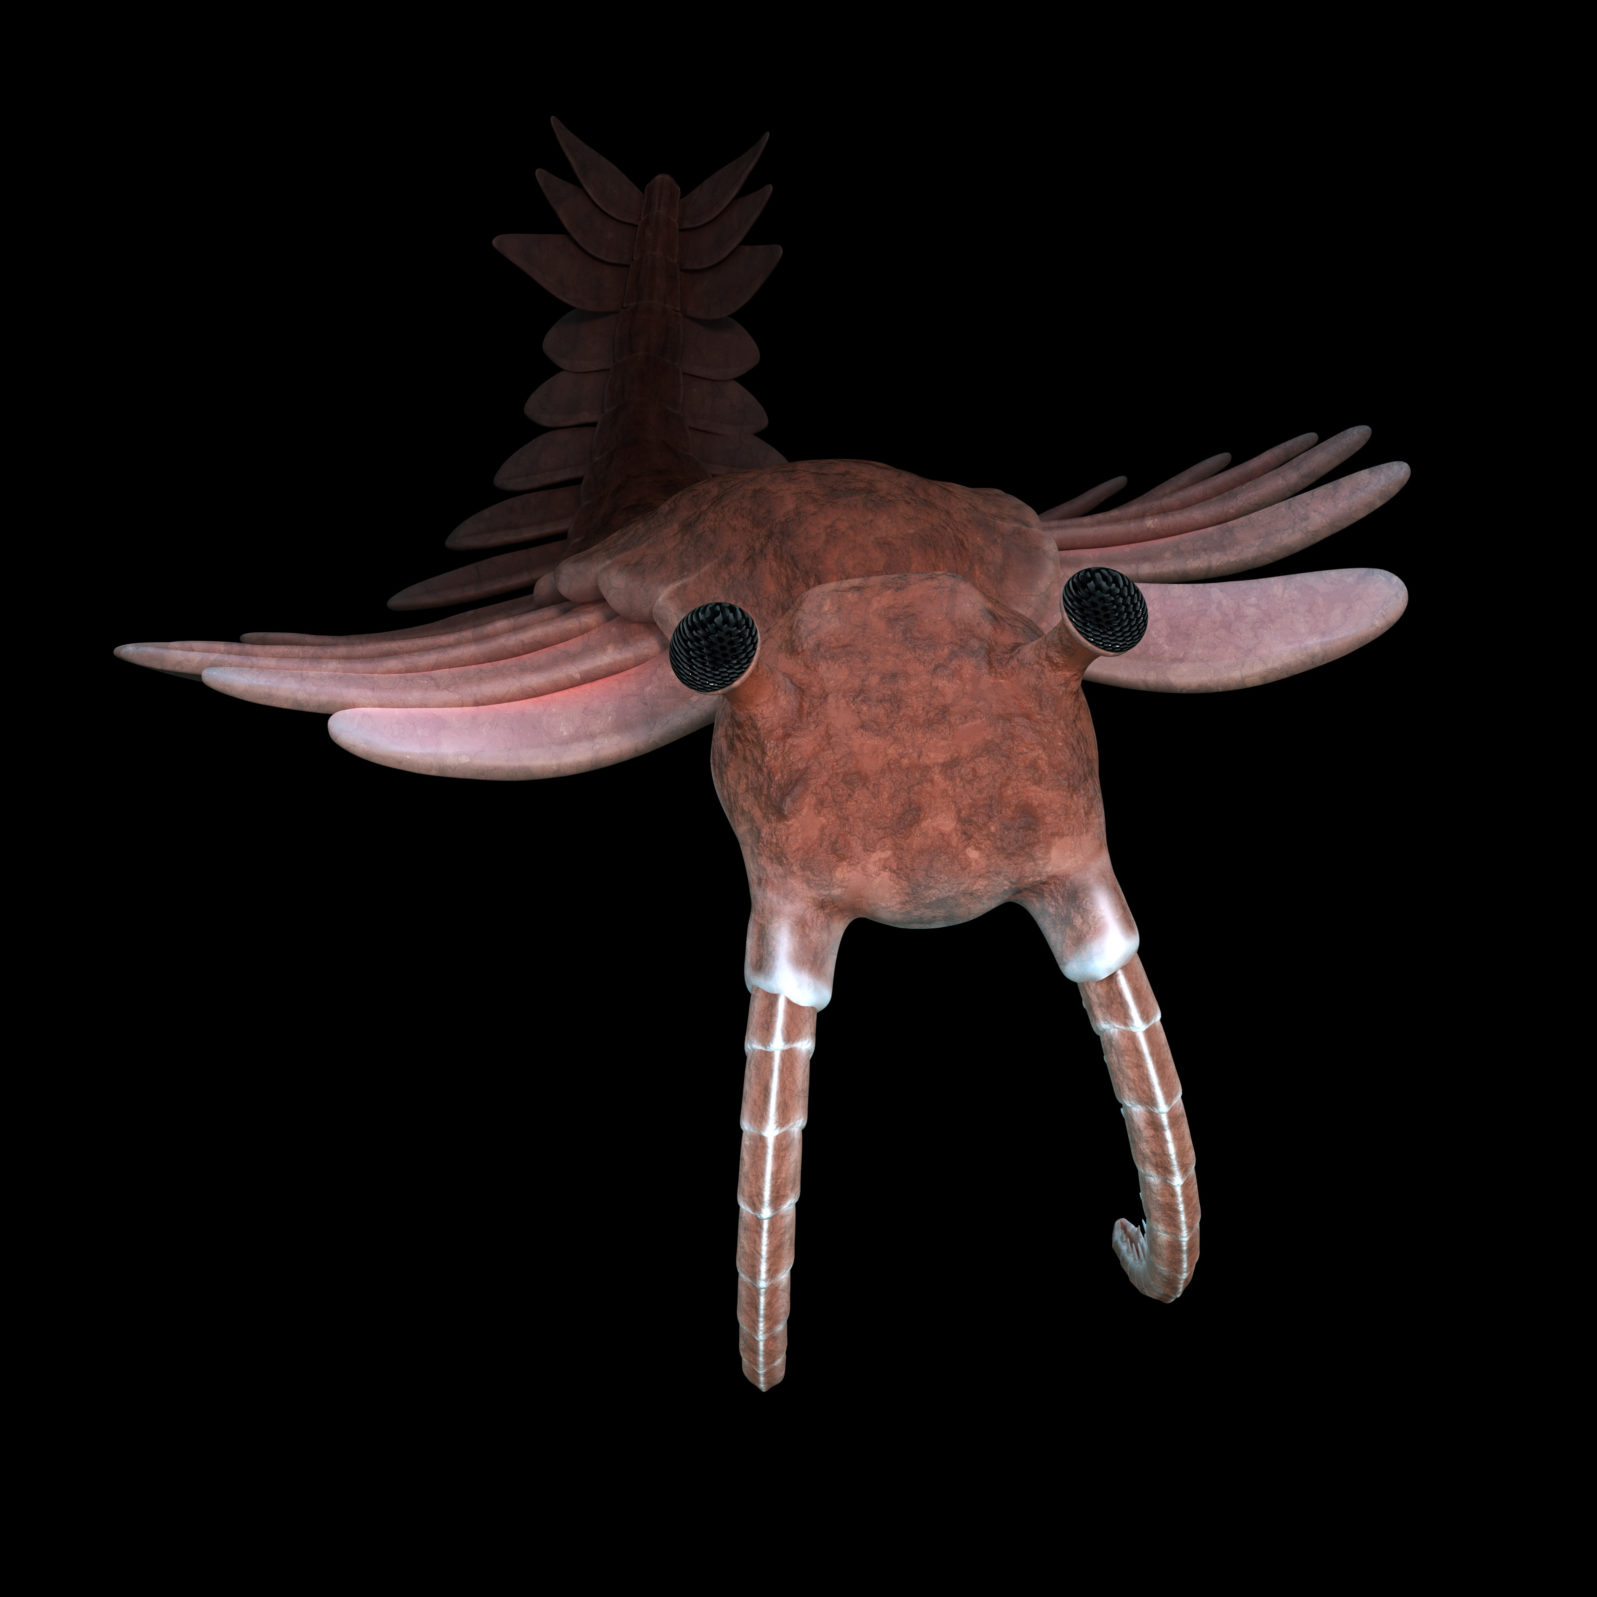 Anomalocaris, creature of the Cambrian period, isolated on black background